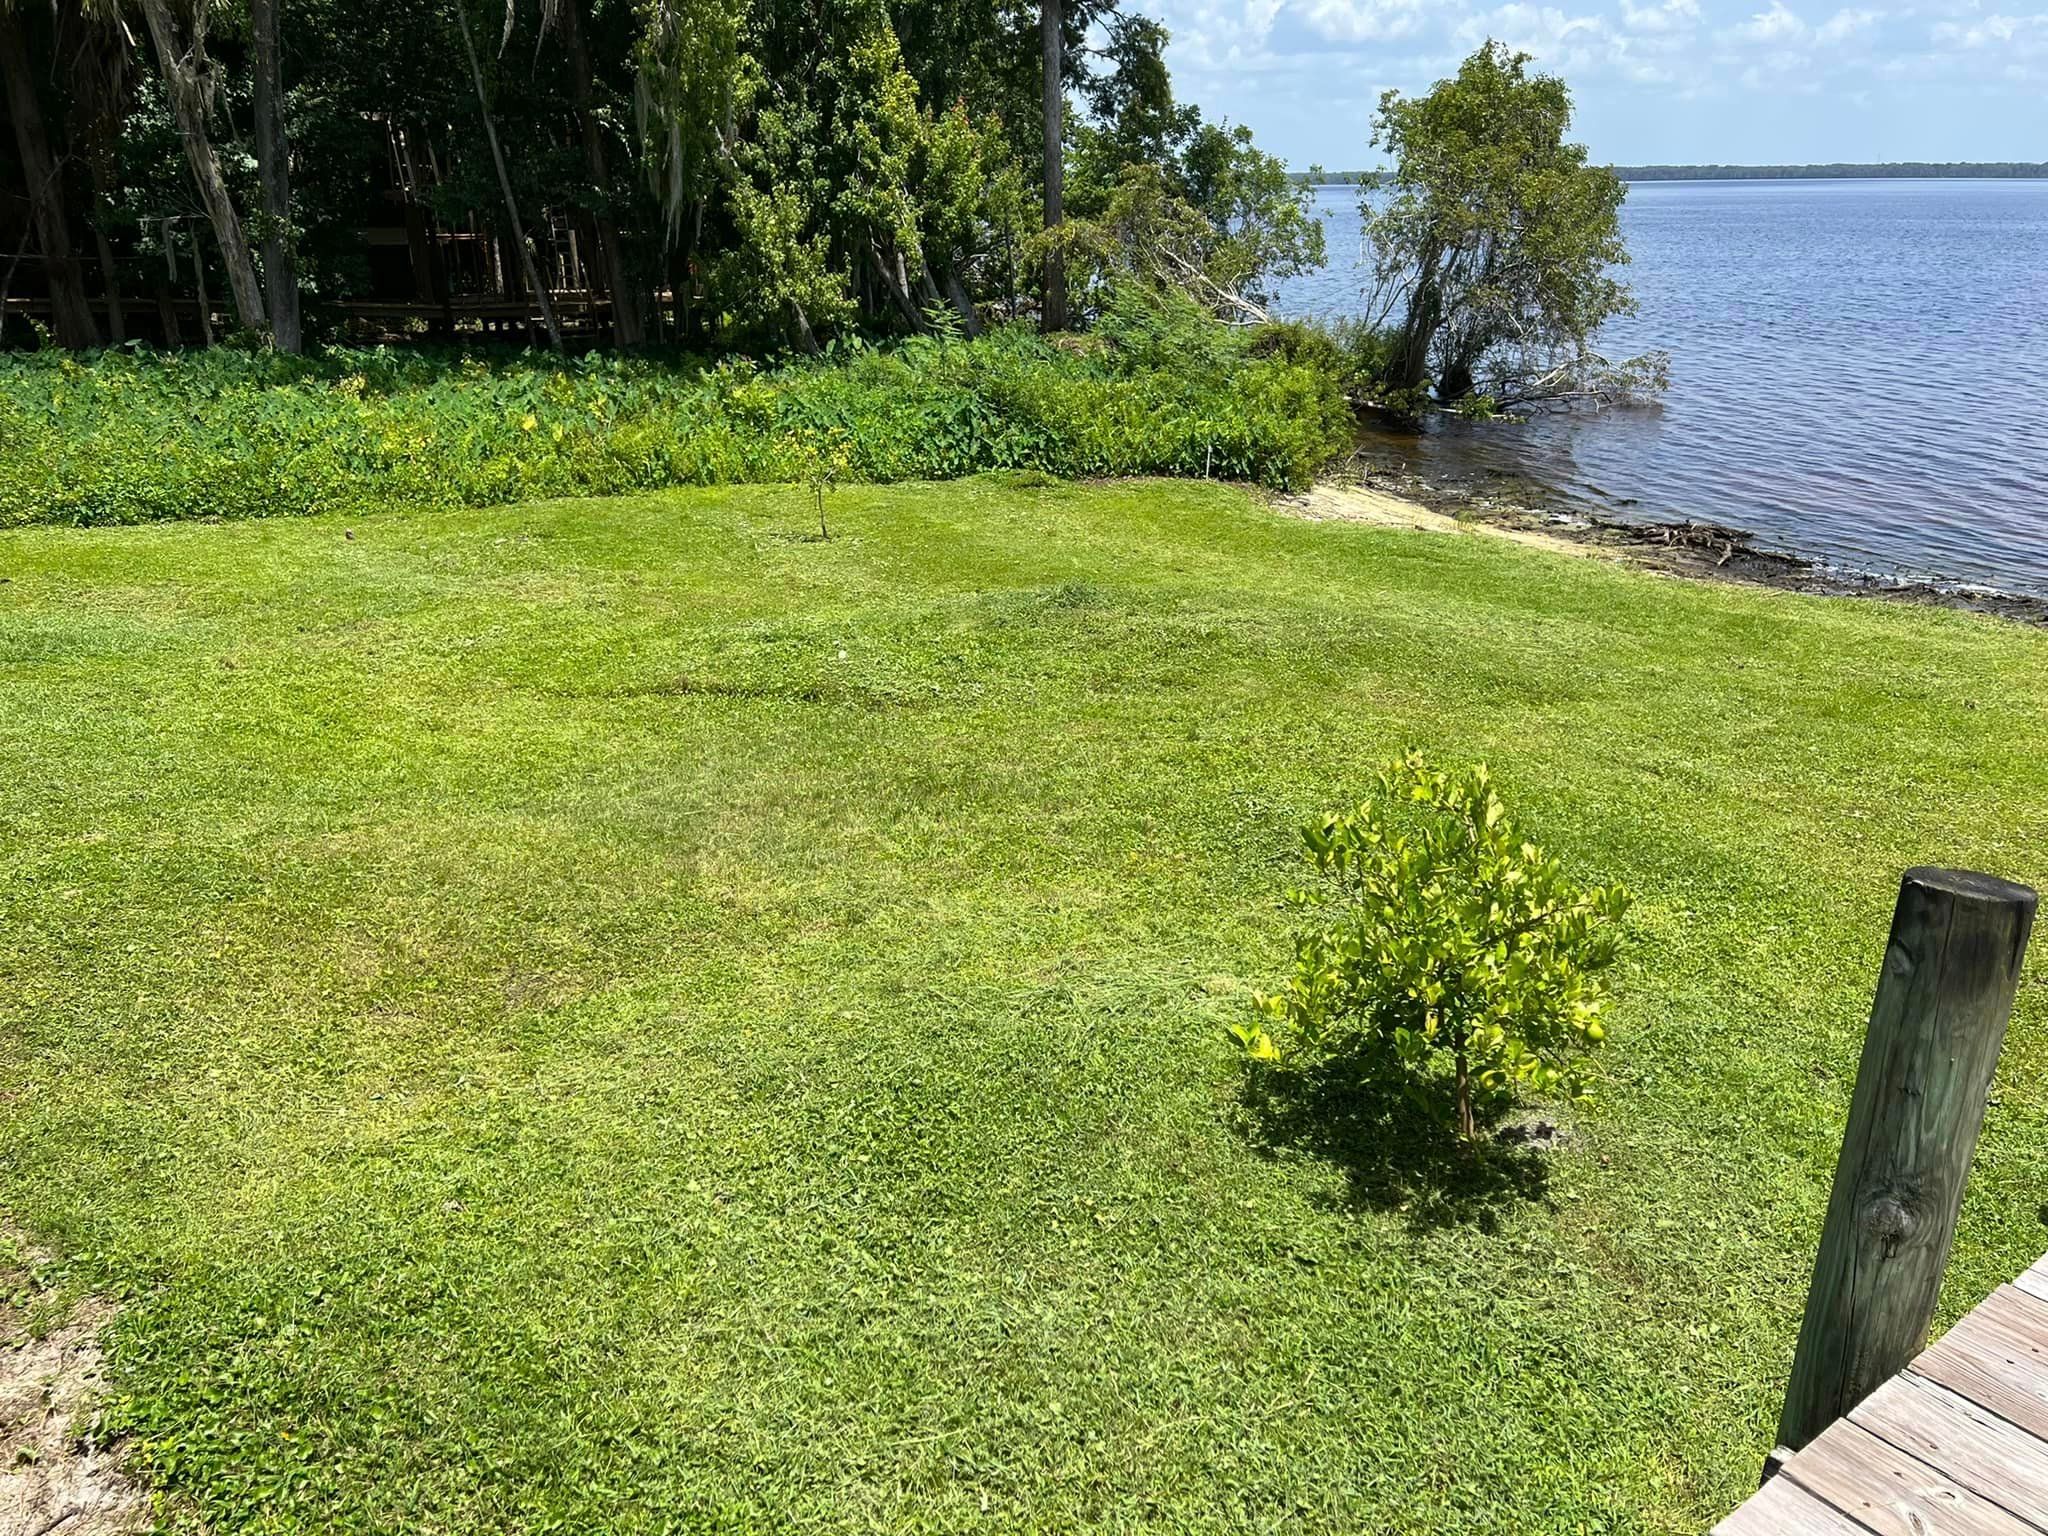 All Photos for F & F Lawn & Landscaping LLC in Crescent City, FL